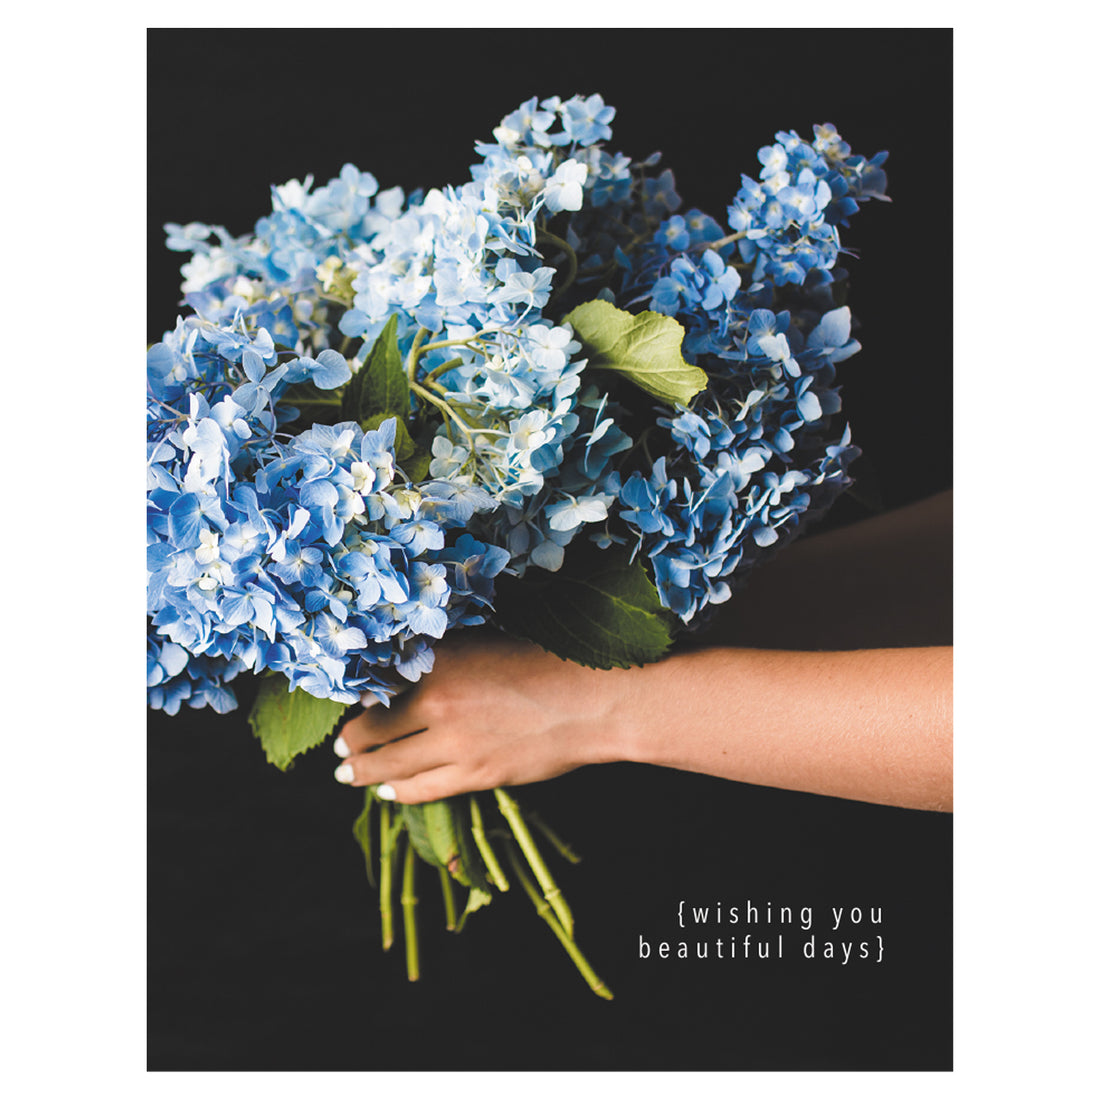 A hand holding a bouquet of blue hydrangeas on a Beautiful Days Card made from high-quality uncoated stock with an elegant eggshell finish, wishing you a beautiful day by Hester &amp; Cook.